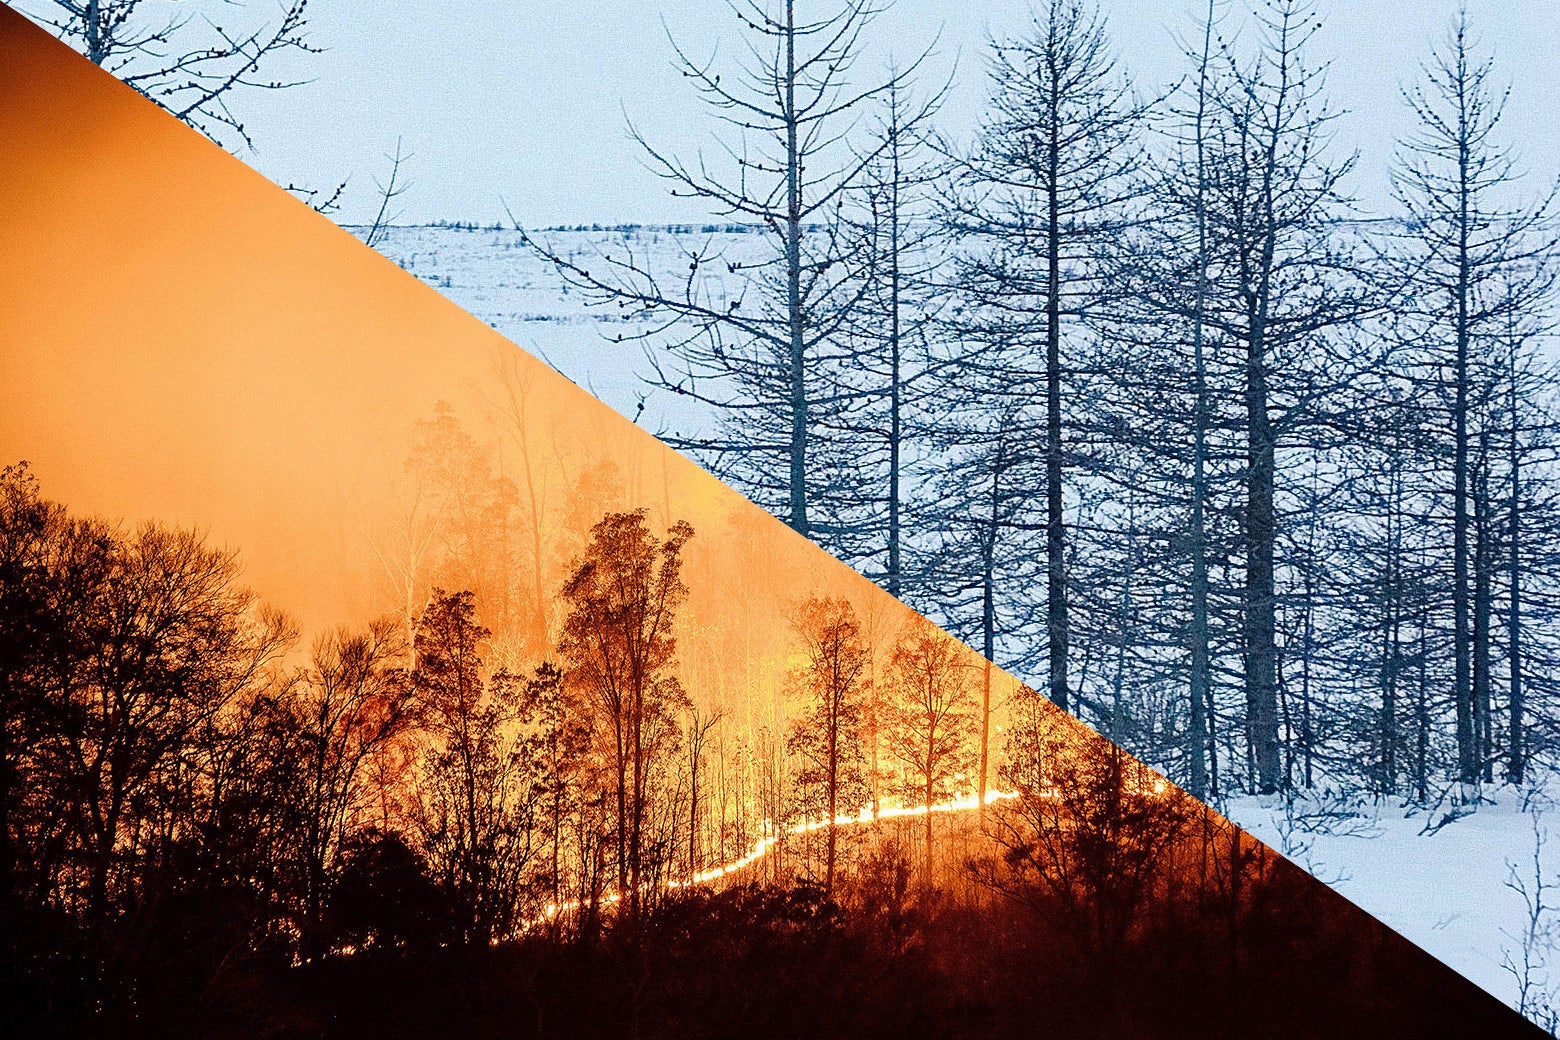 A split-screen of a wildfire and a snowy woods. The forecast app Dark Sky is predicting wild weather in the coming days.